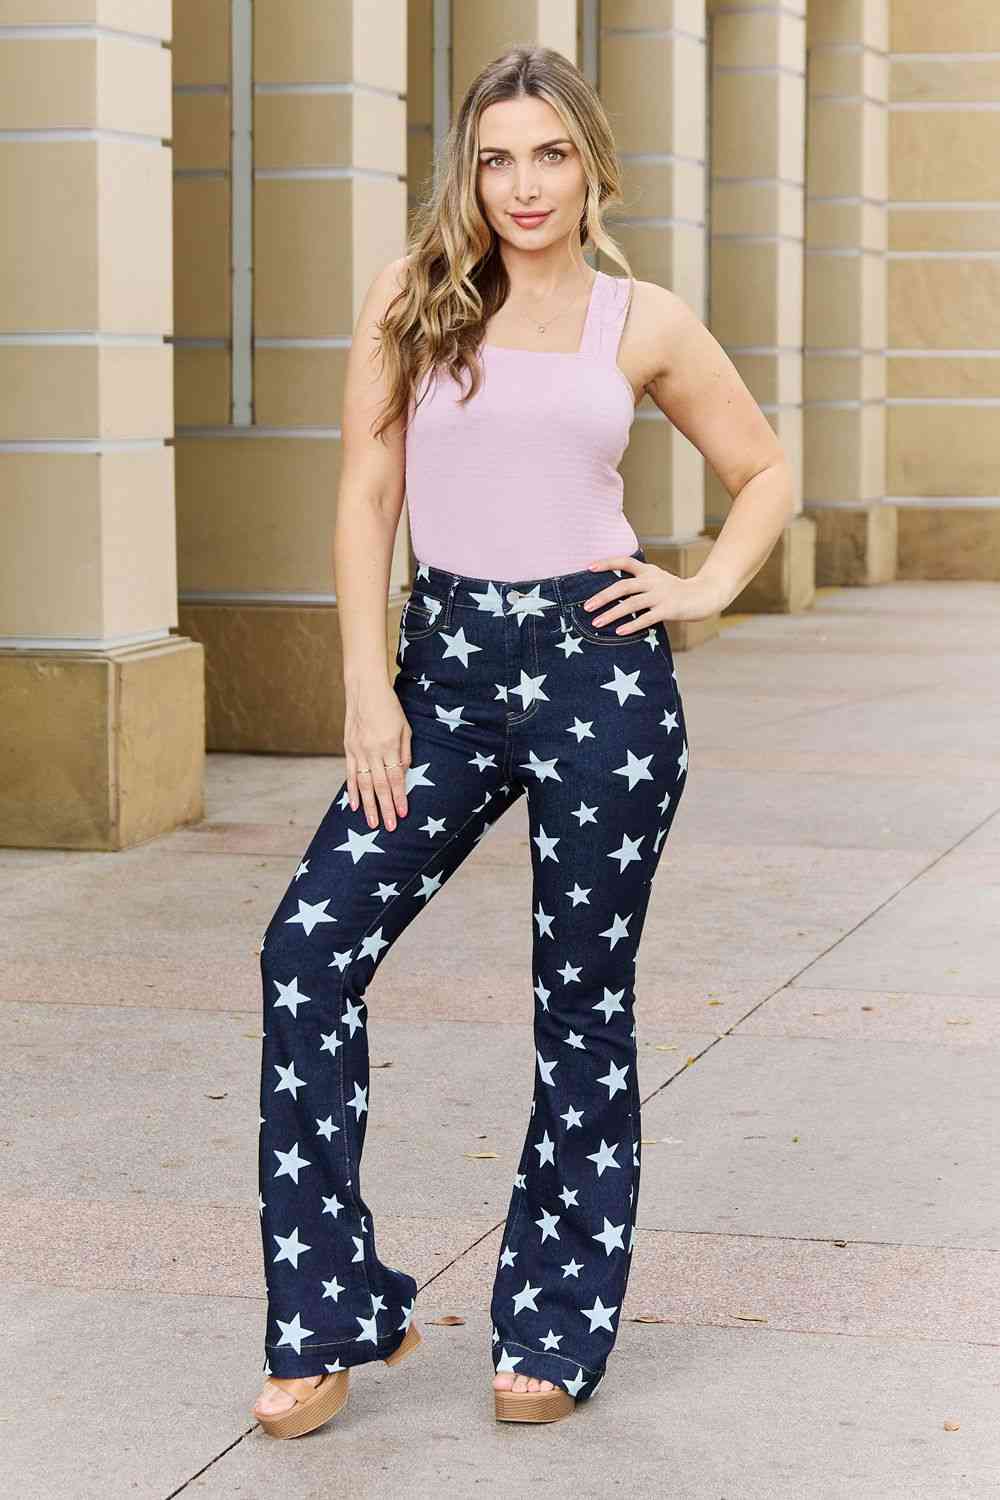 Gray Judy Blue Janelle Full Size High Waist Star Print Flare Jeans Clothing